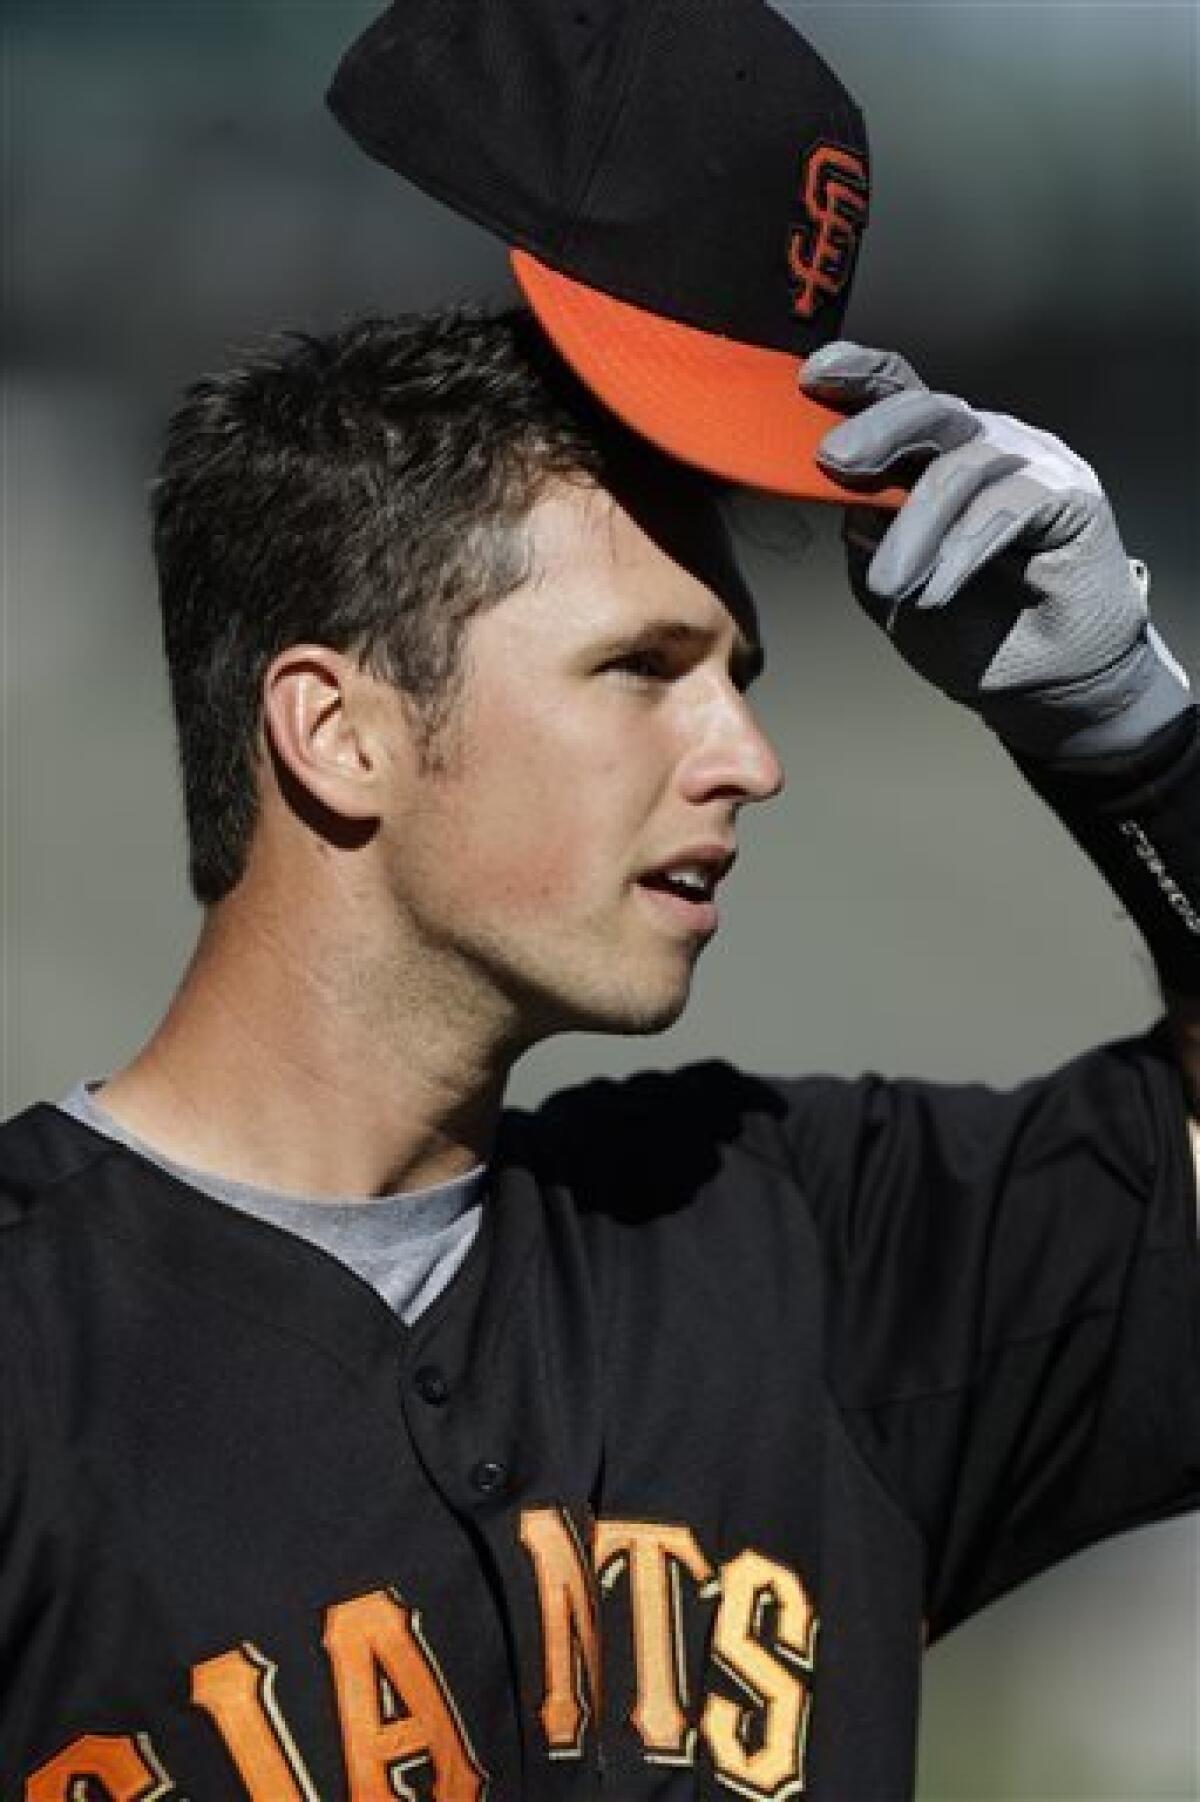 Buster Posey plans to retire, ending his storied Giants career